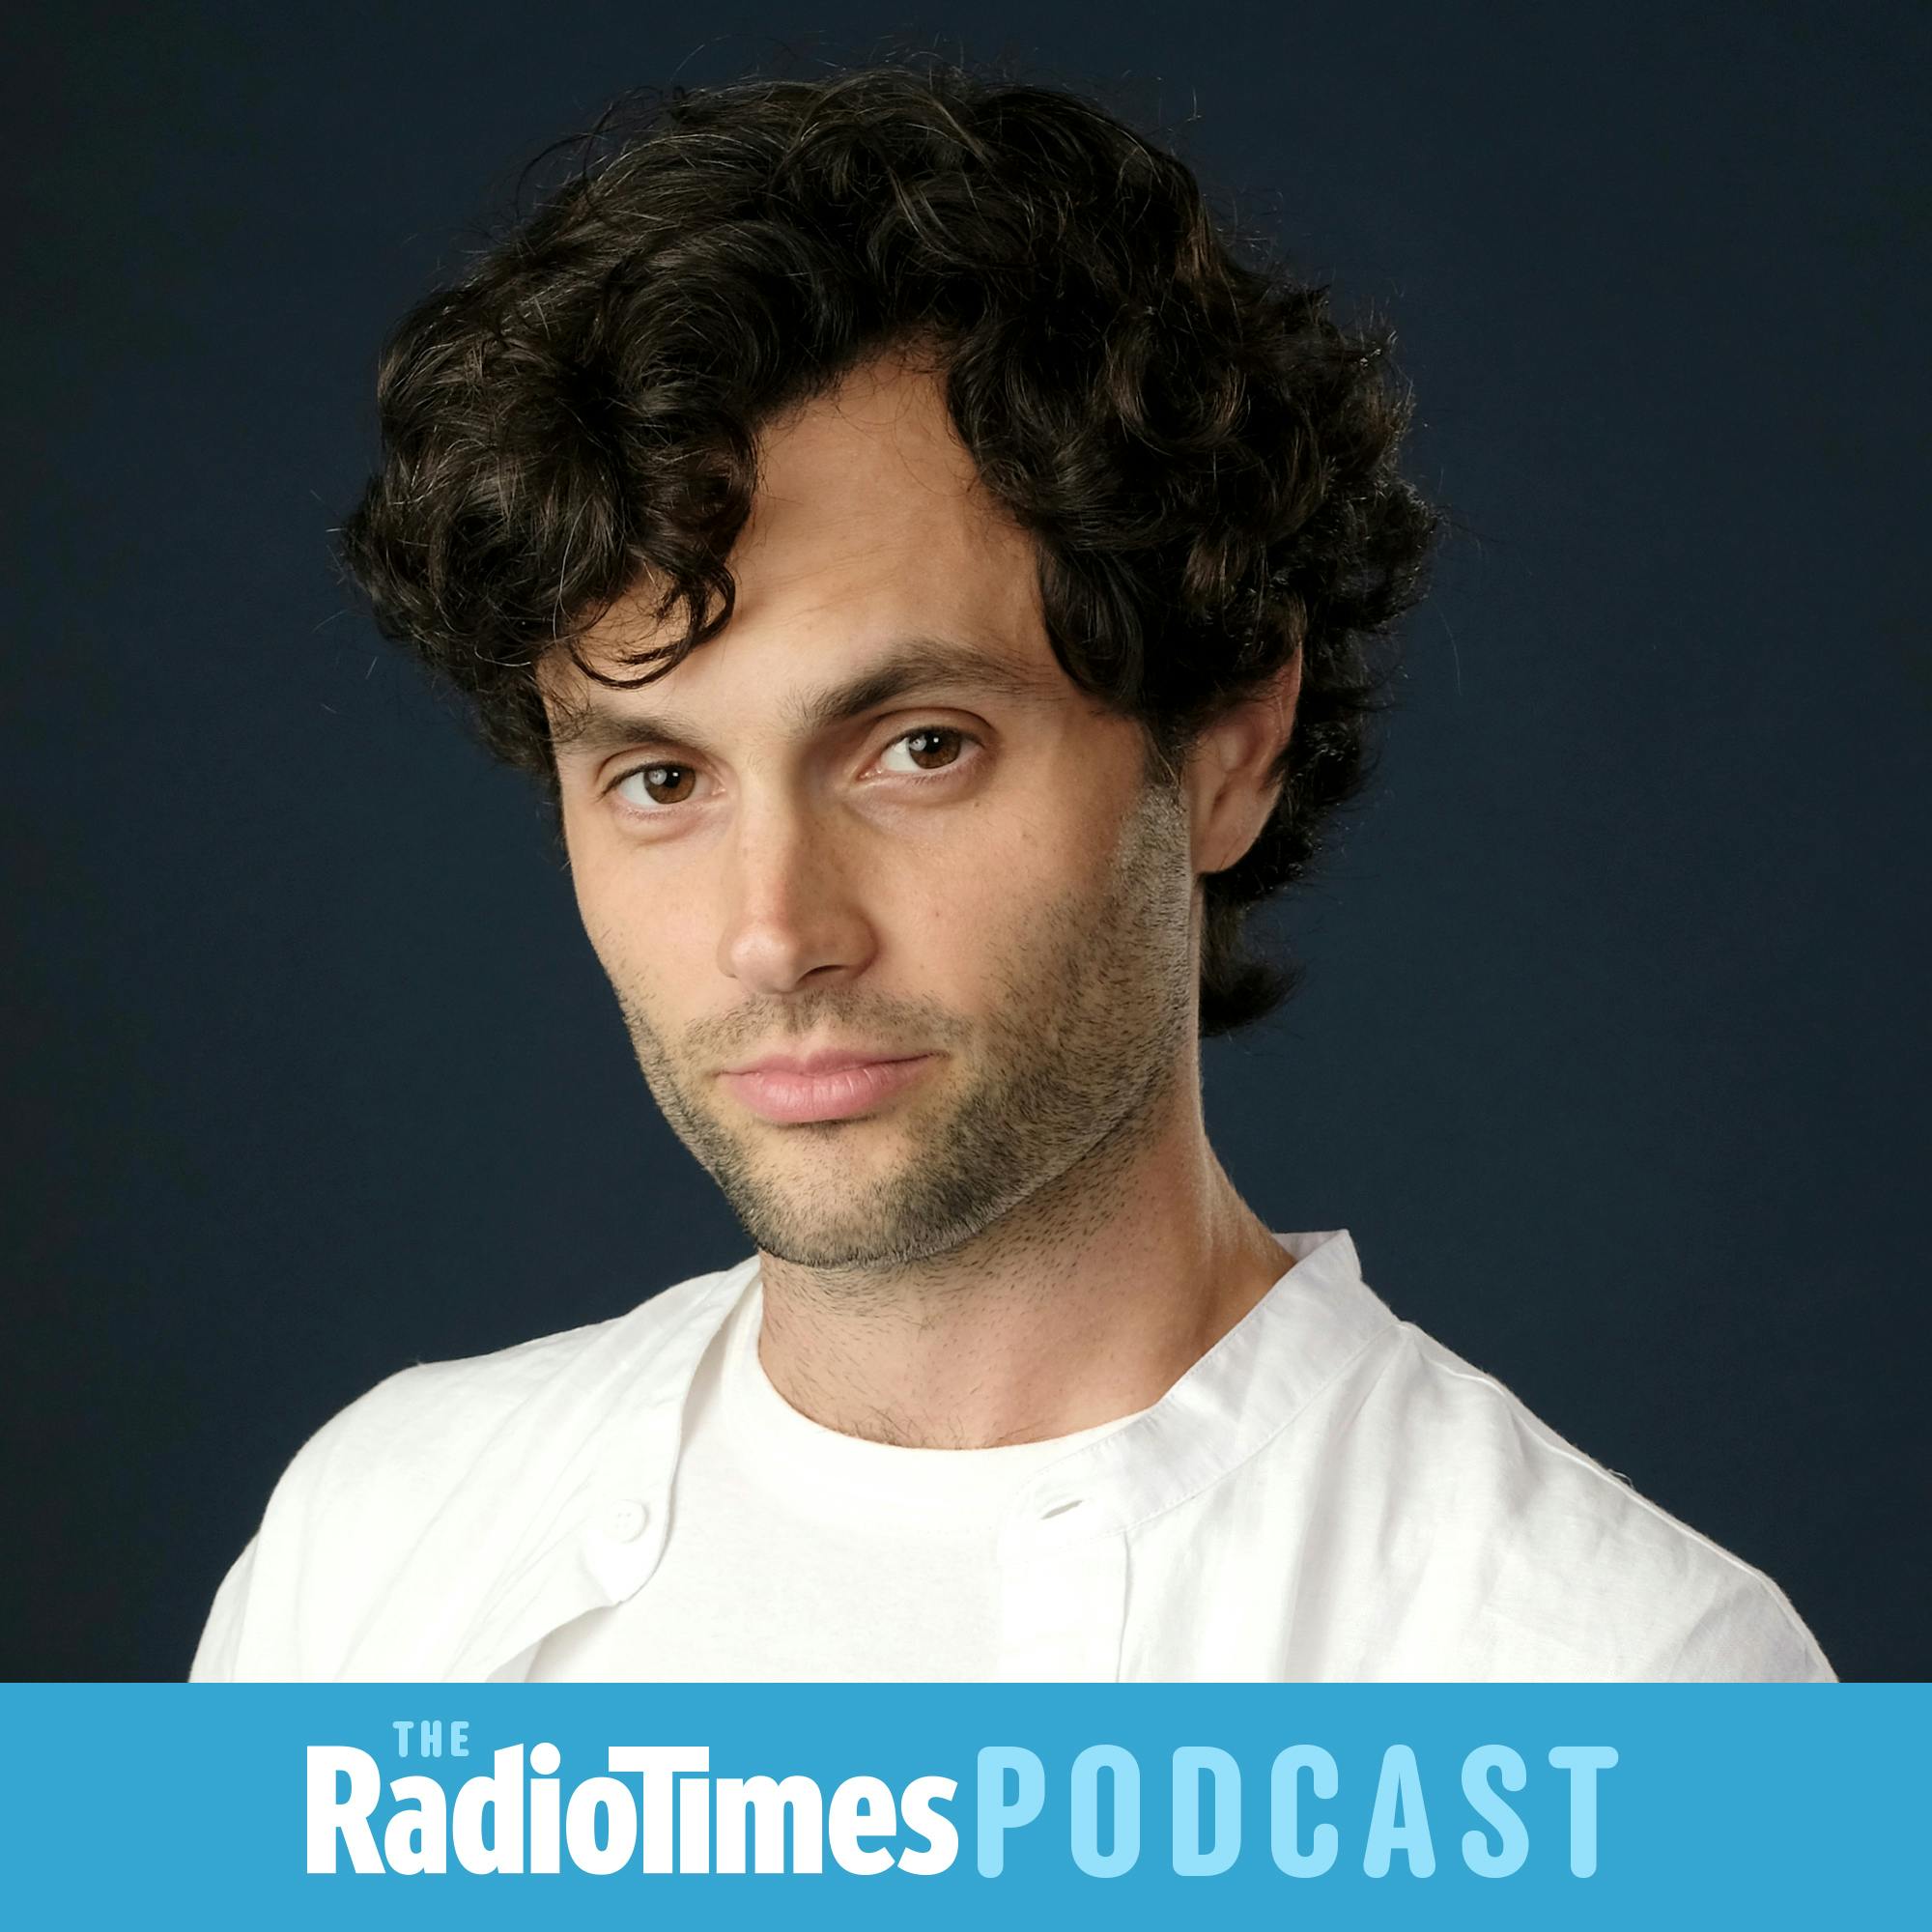 Penn Badgley on playing a serial killer, responsible parenting and why he's gone off sex scenes